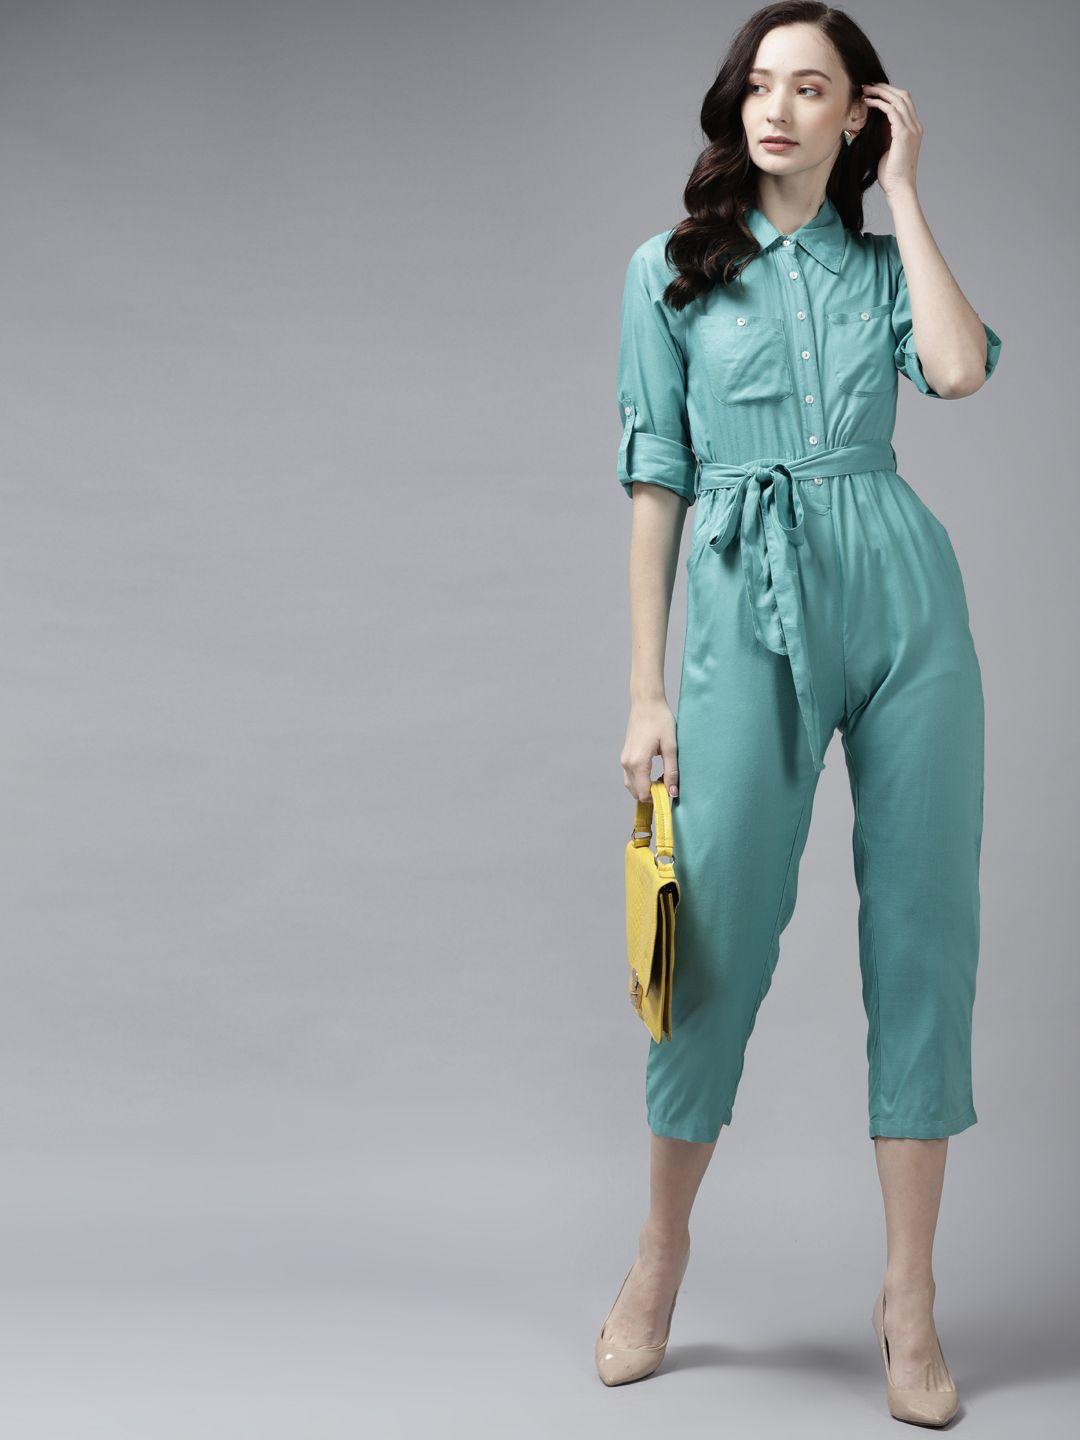 the dry state turquoise blue shirt collar basic jumpsuit